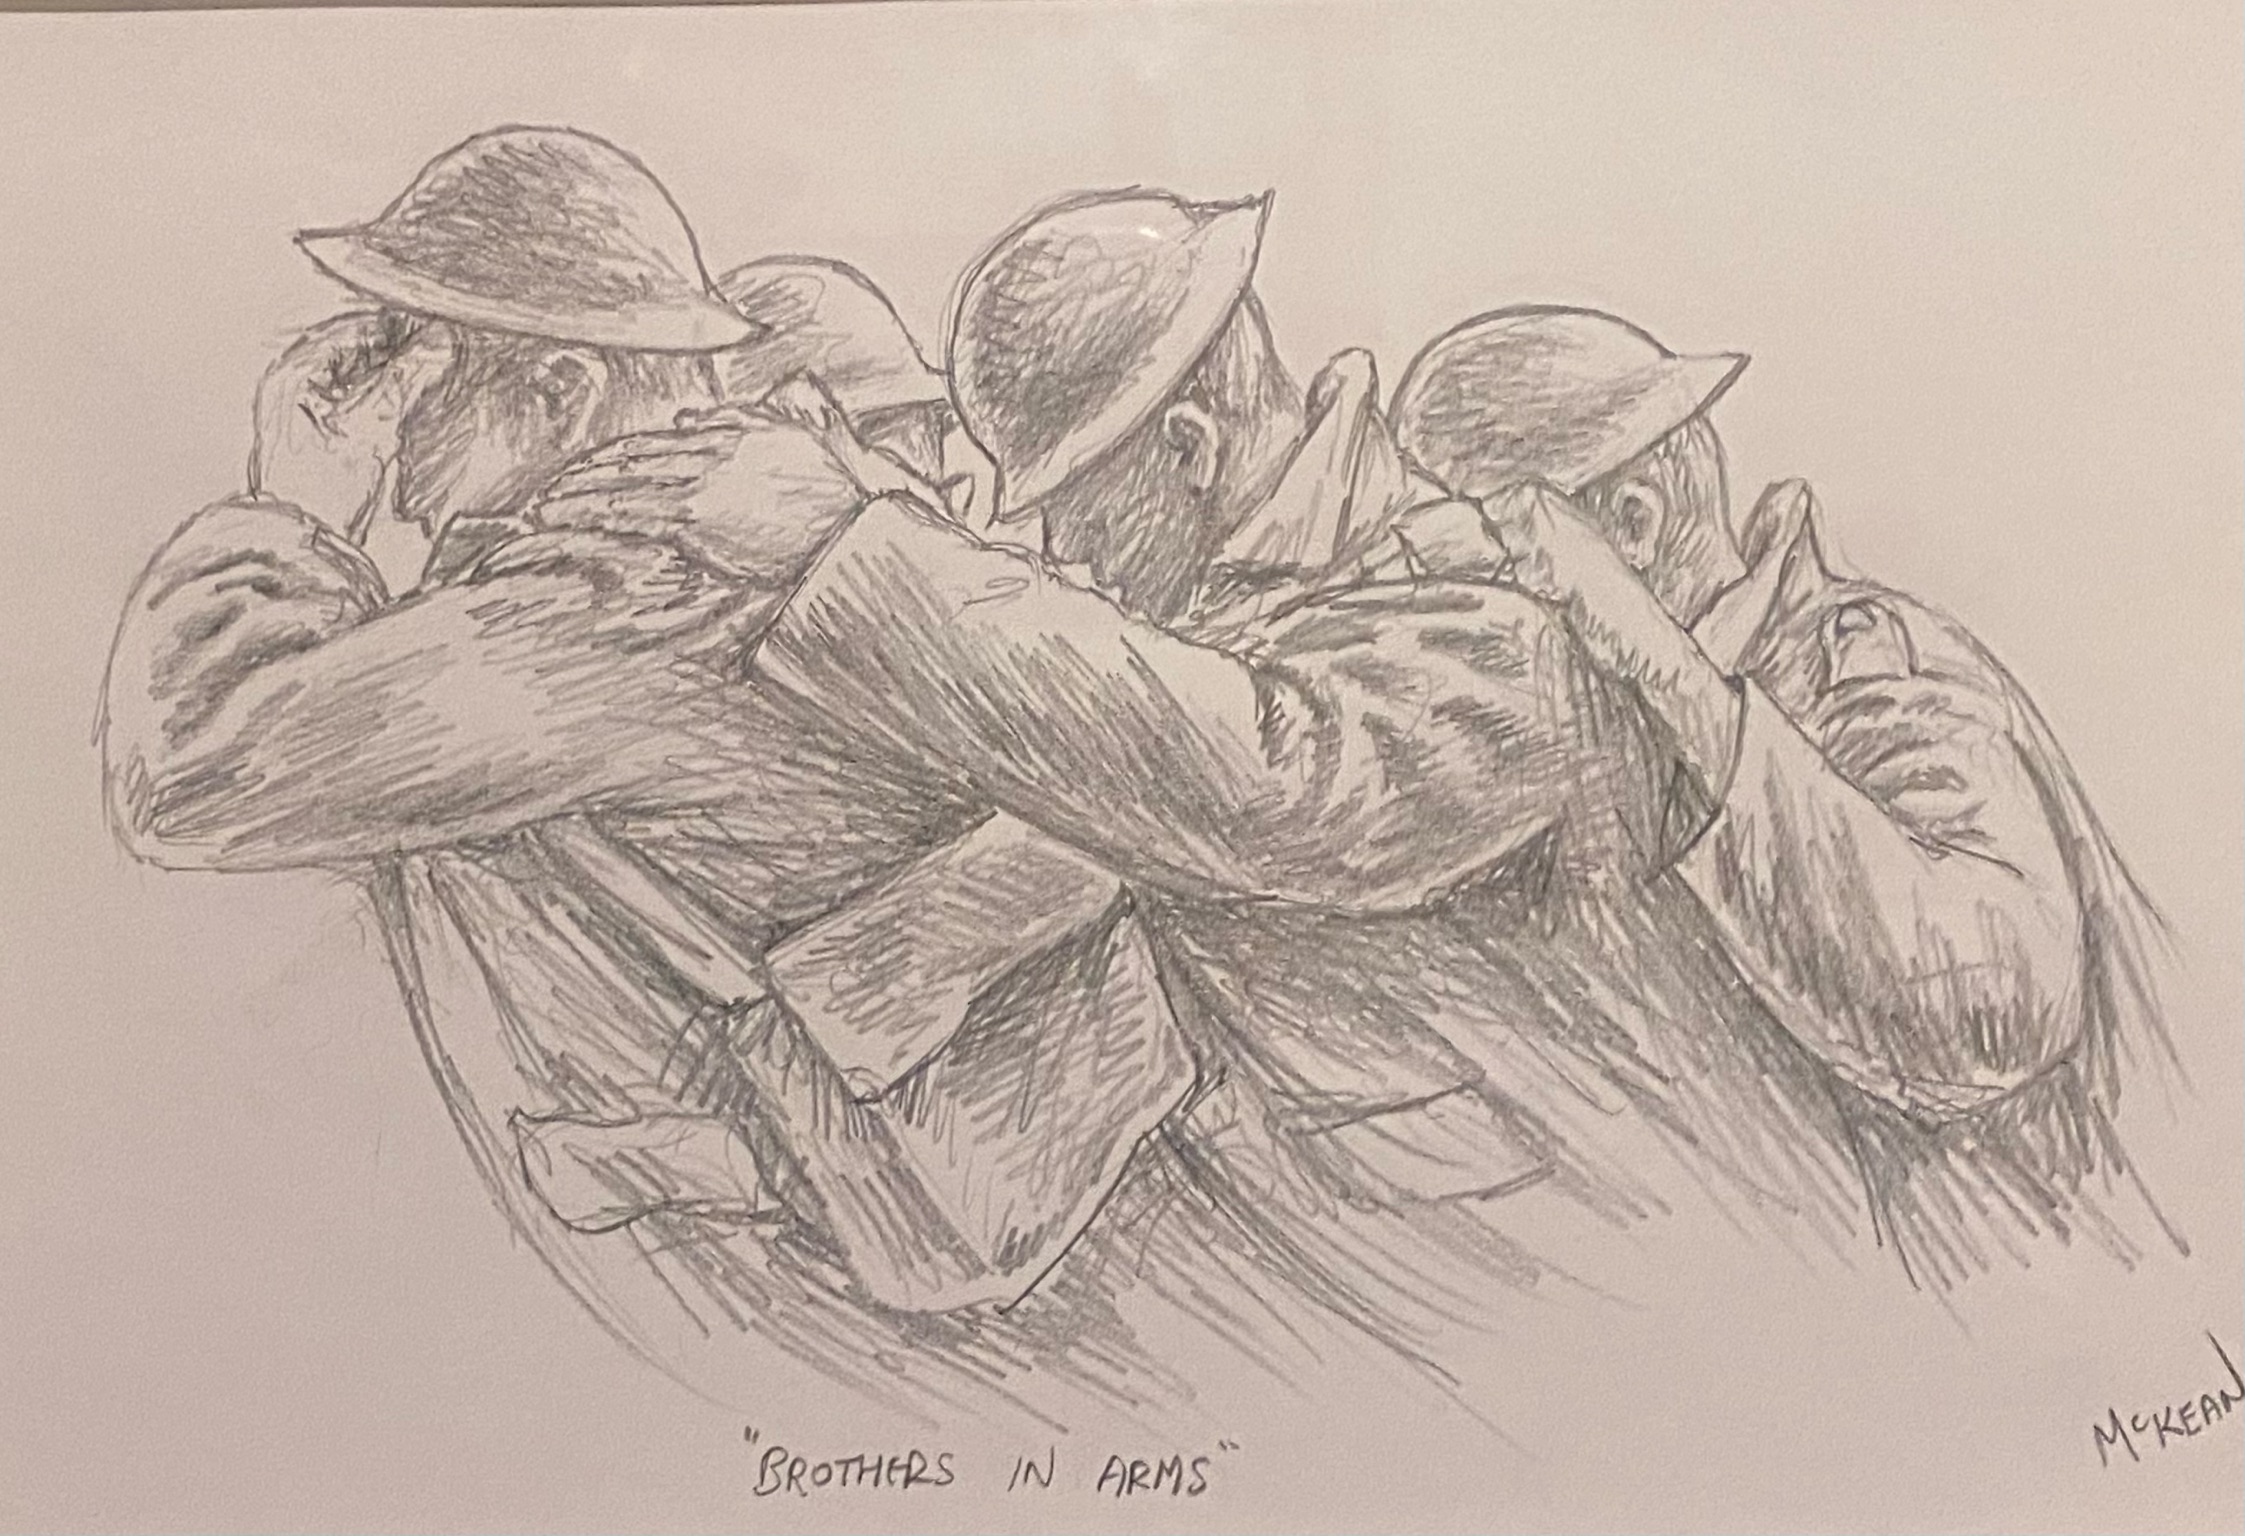 "Brothers in arms" Framed Signed Pencil drawing by Graham McKean - Image 4 of 5